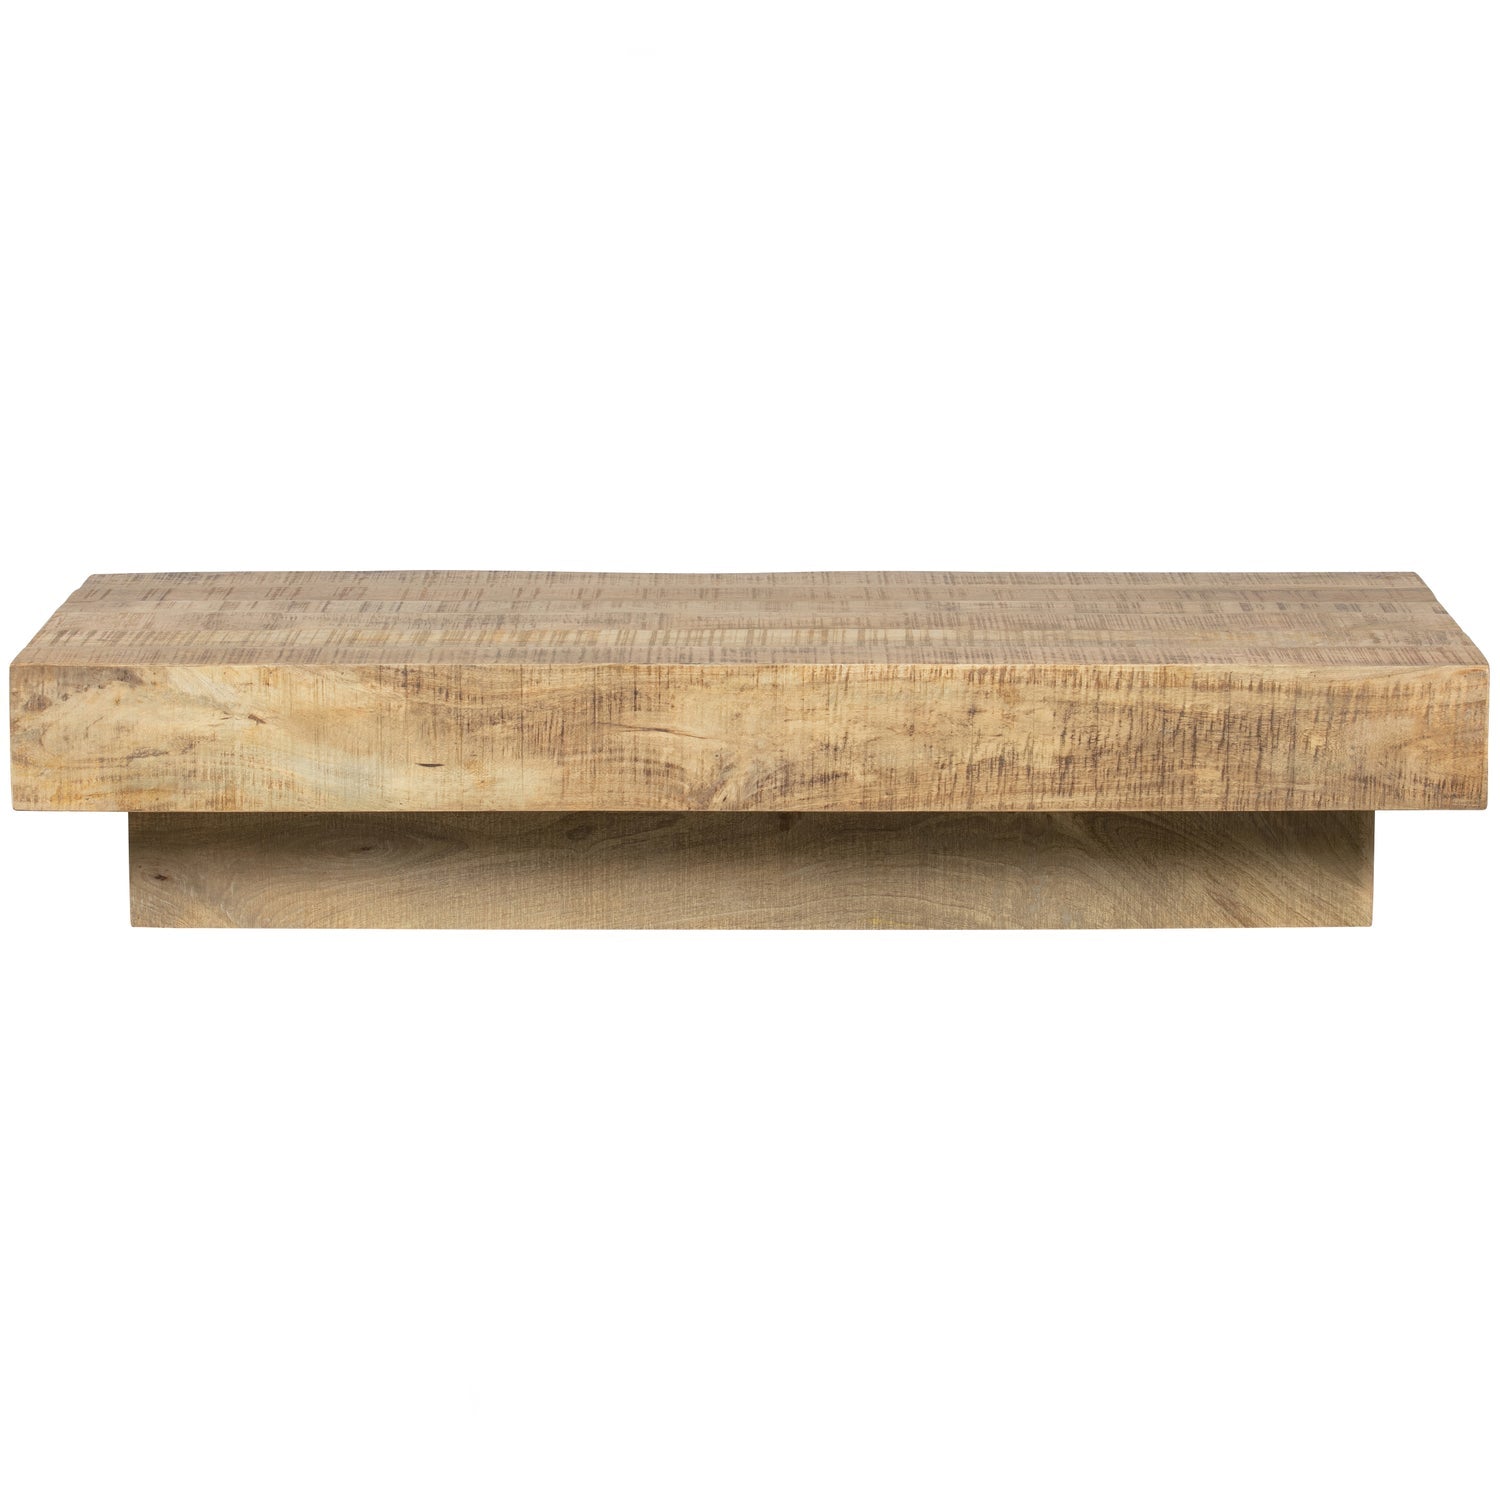 BALK COFFEE TABLE WOOD NATURAL